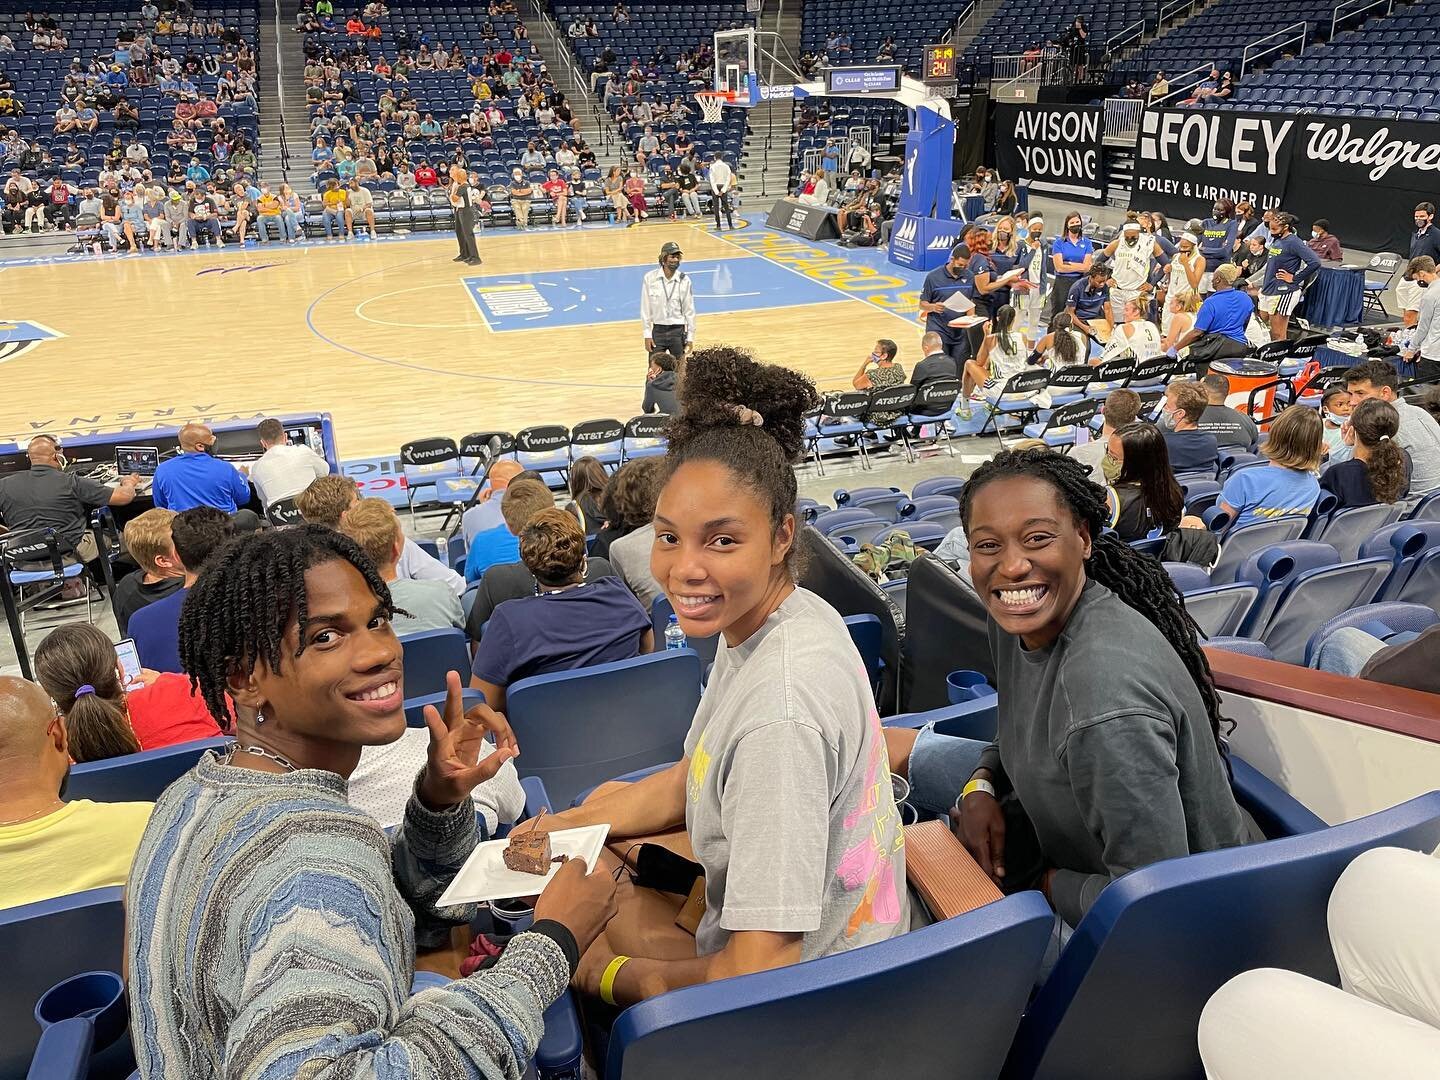 About last night&hellip;

Game Changers supporting @wnba at the @chicagosky vs @dallaswings game. #wegamechange